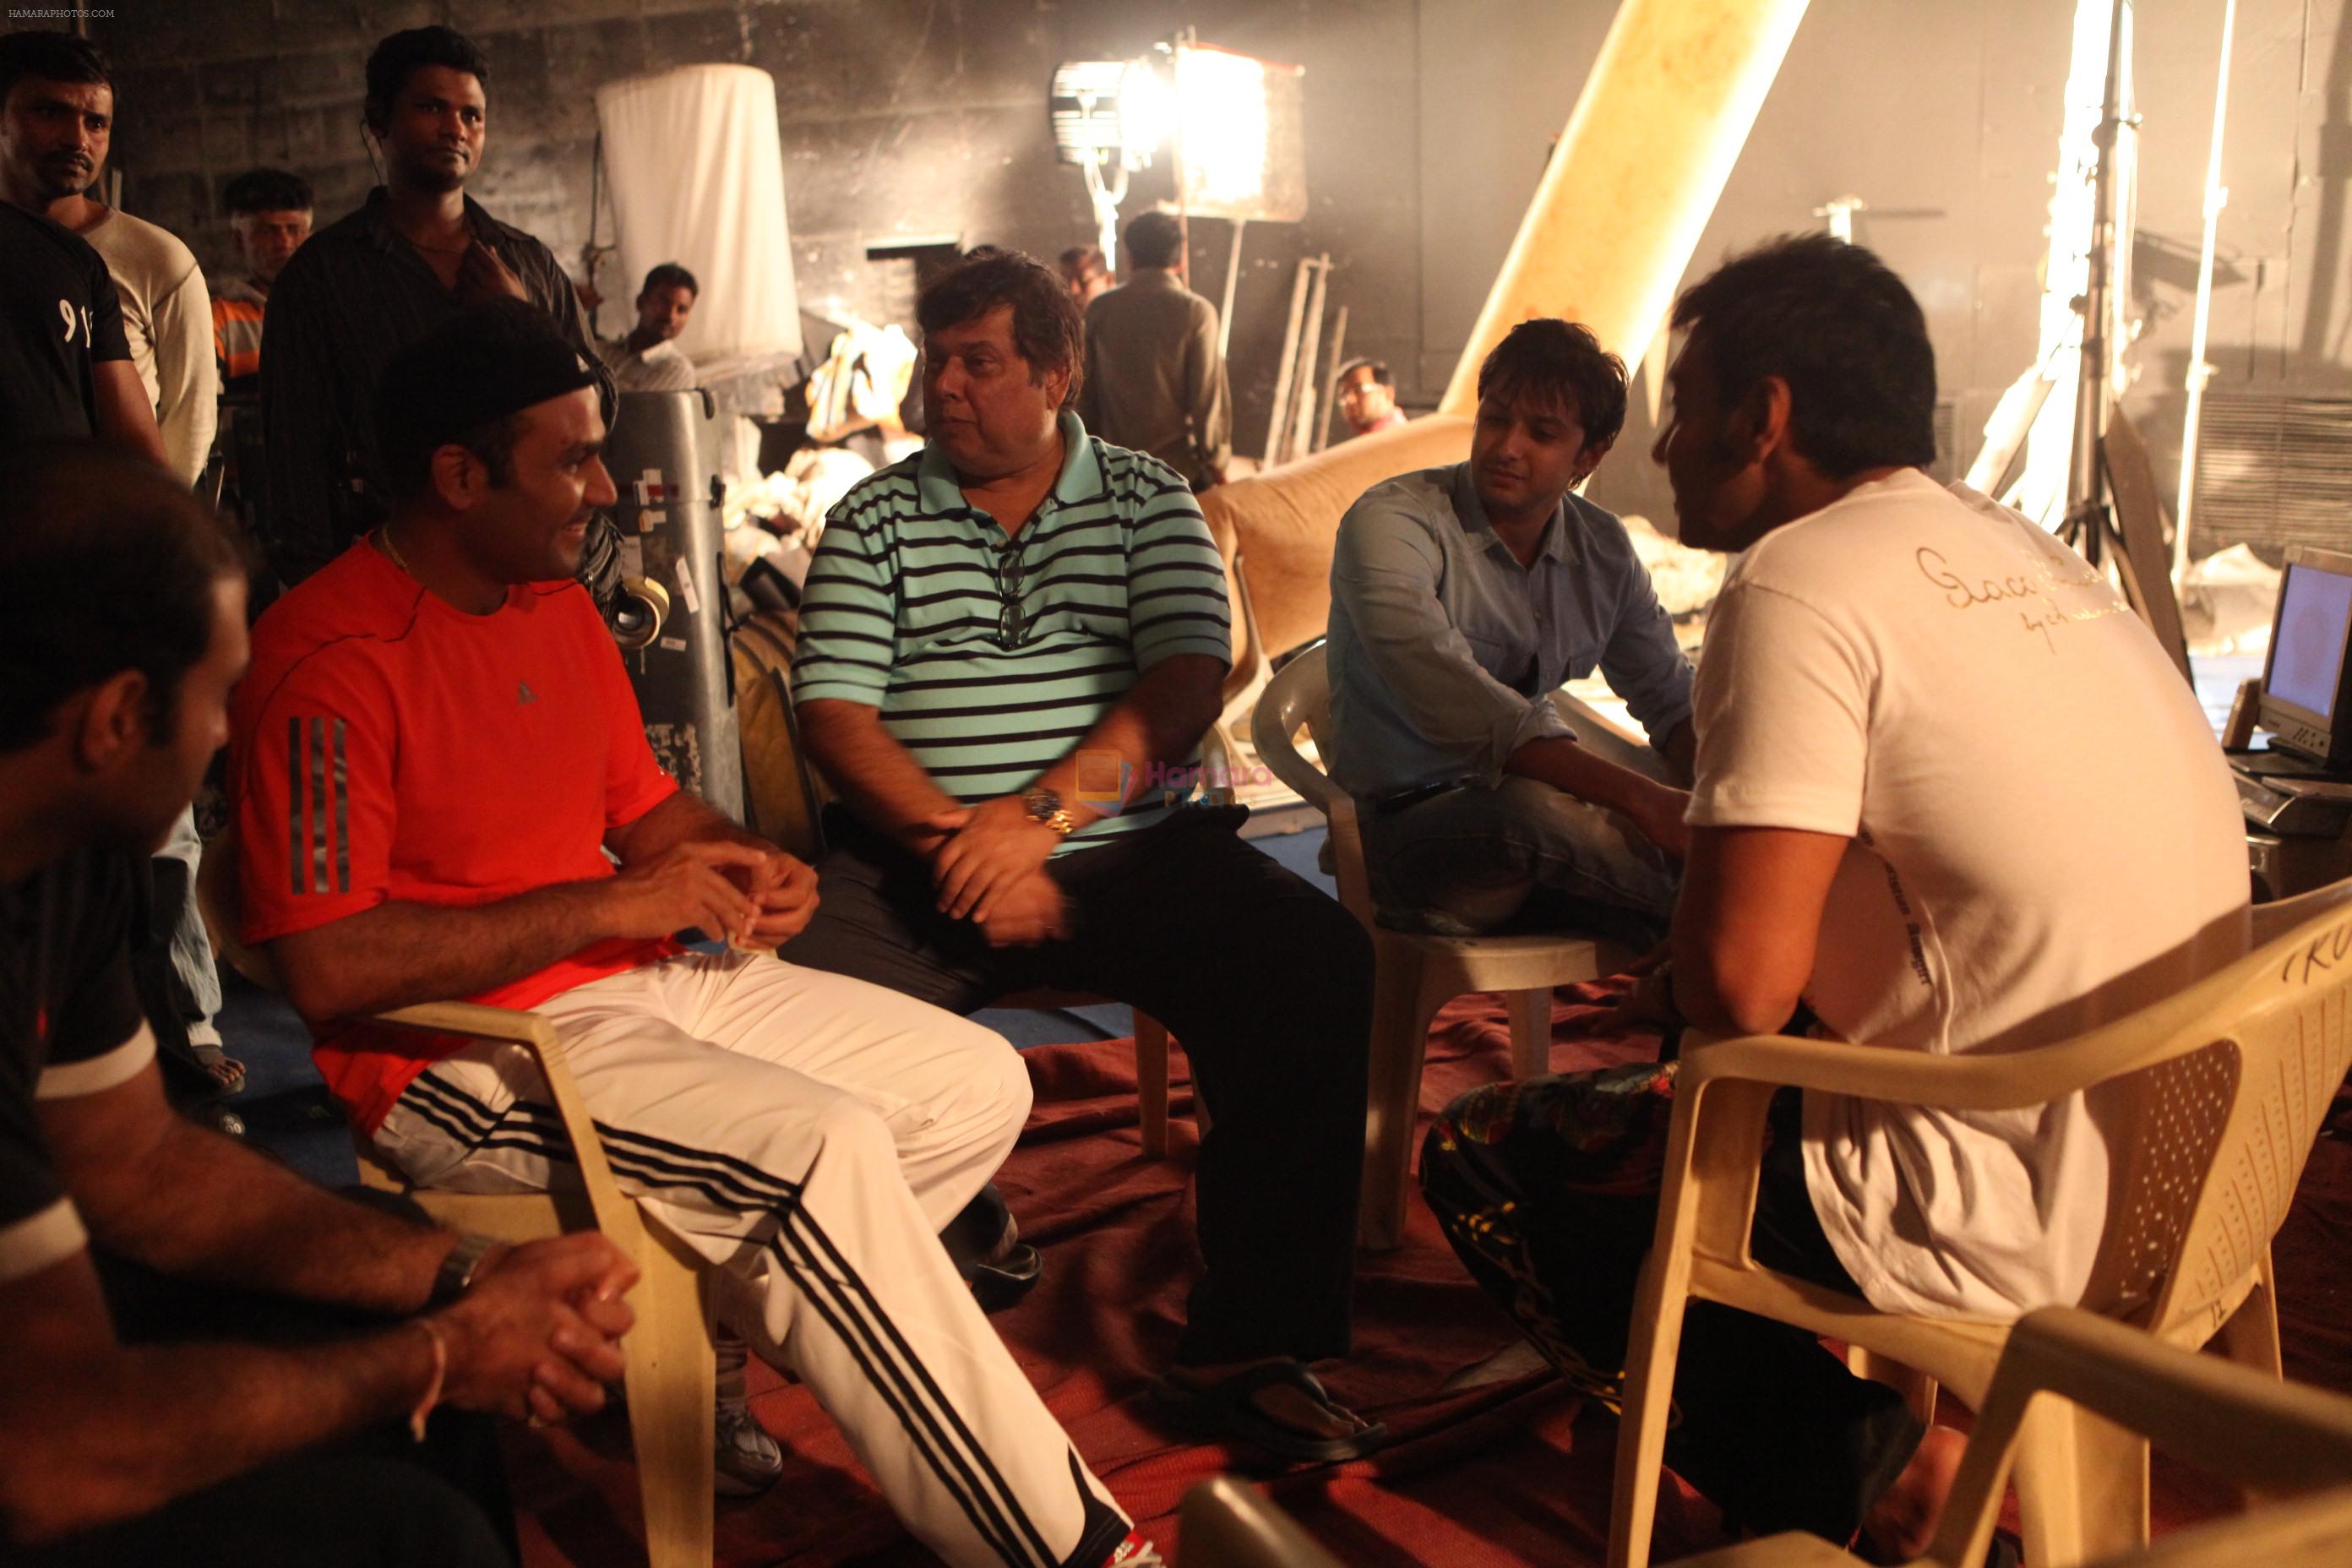 Virender Sehwaf, David Dhawan, Vatsal Seth and Ajay Devgn on the sets of film Rascals on 16th Sept 2011